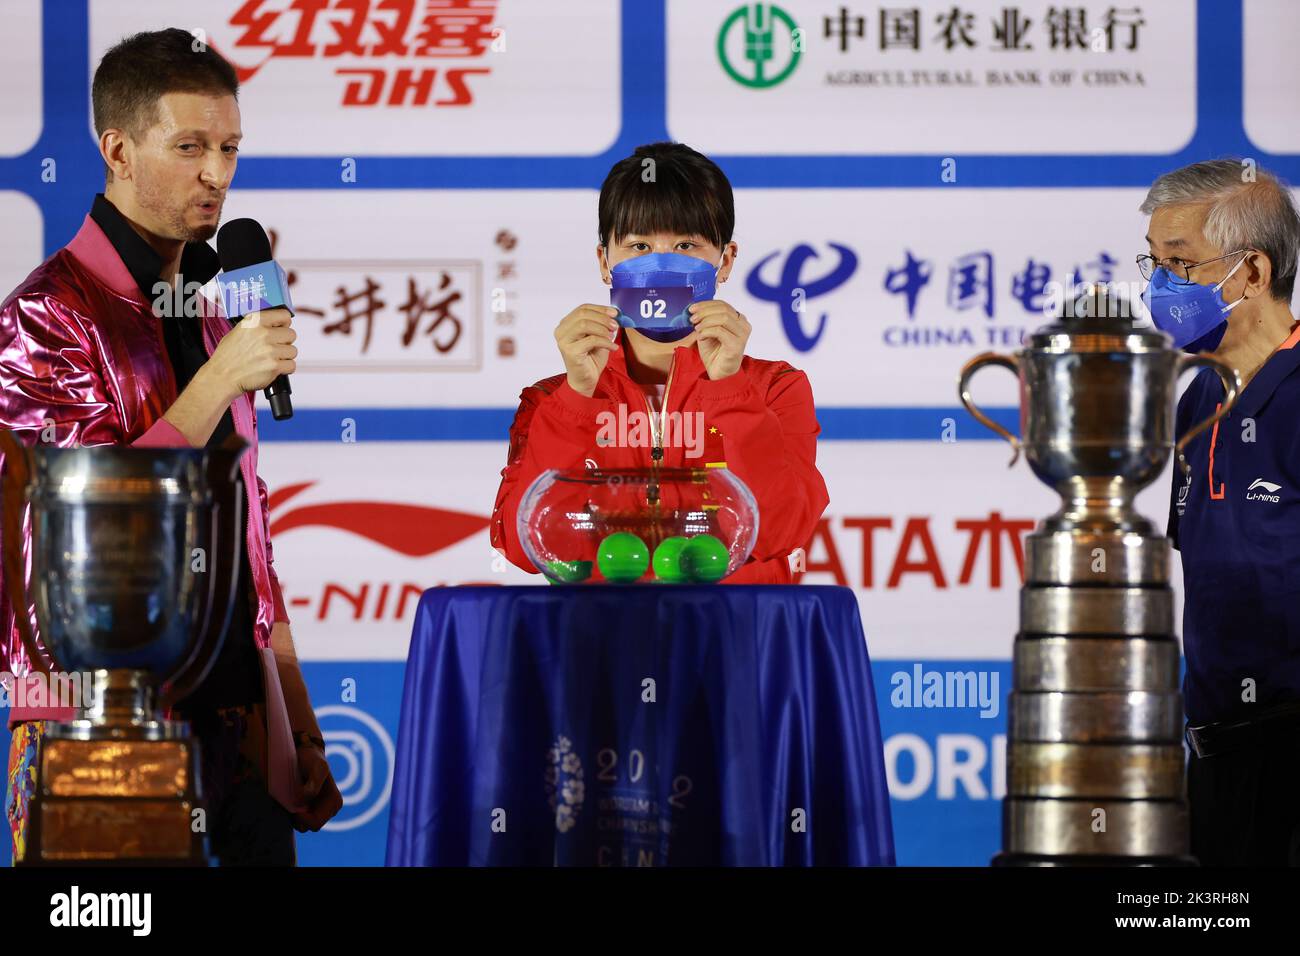 Chengdu, China's Sichuan Province. 28th Sep, 2022. Chen Xingtong (C) of China shows a draw slip during the draw ceremony of the 2022 ITTF World Team Table Tennis Championships Finals in Chengdu, southwest China's Sichuan Province, Sept. 28, 2022. Credit: Liu Xu/Xinhua/Alamy Live News Stock Photo